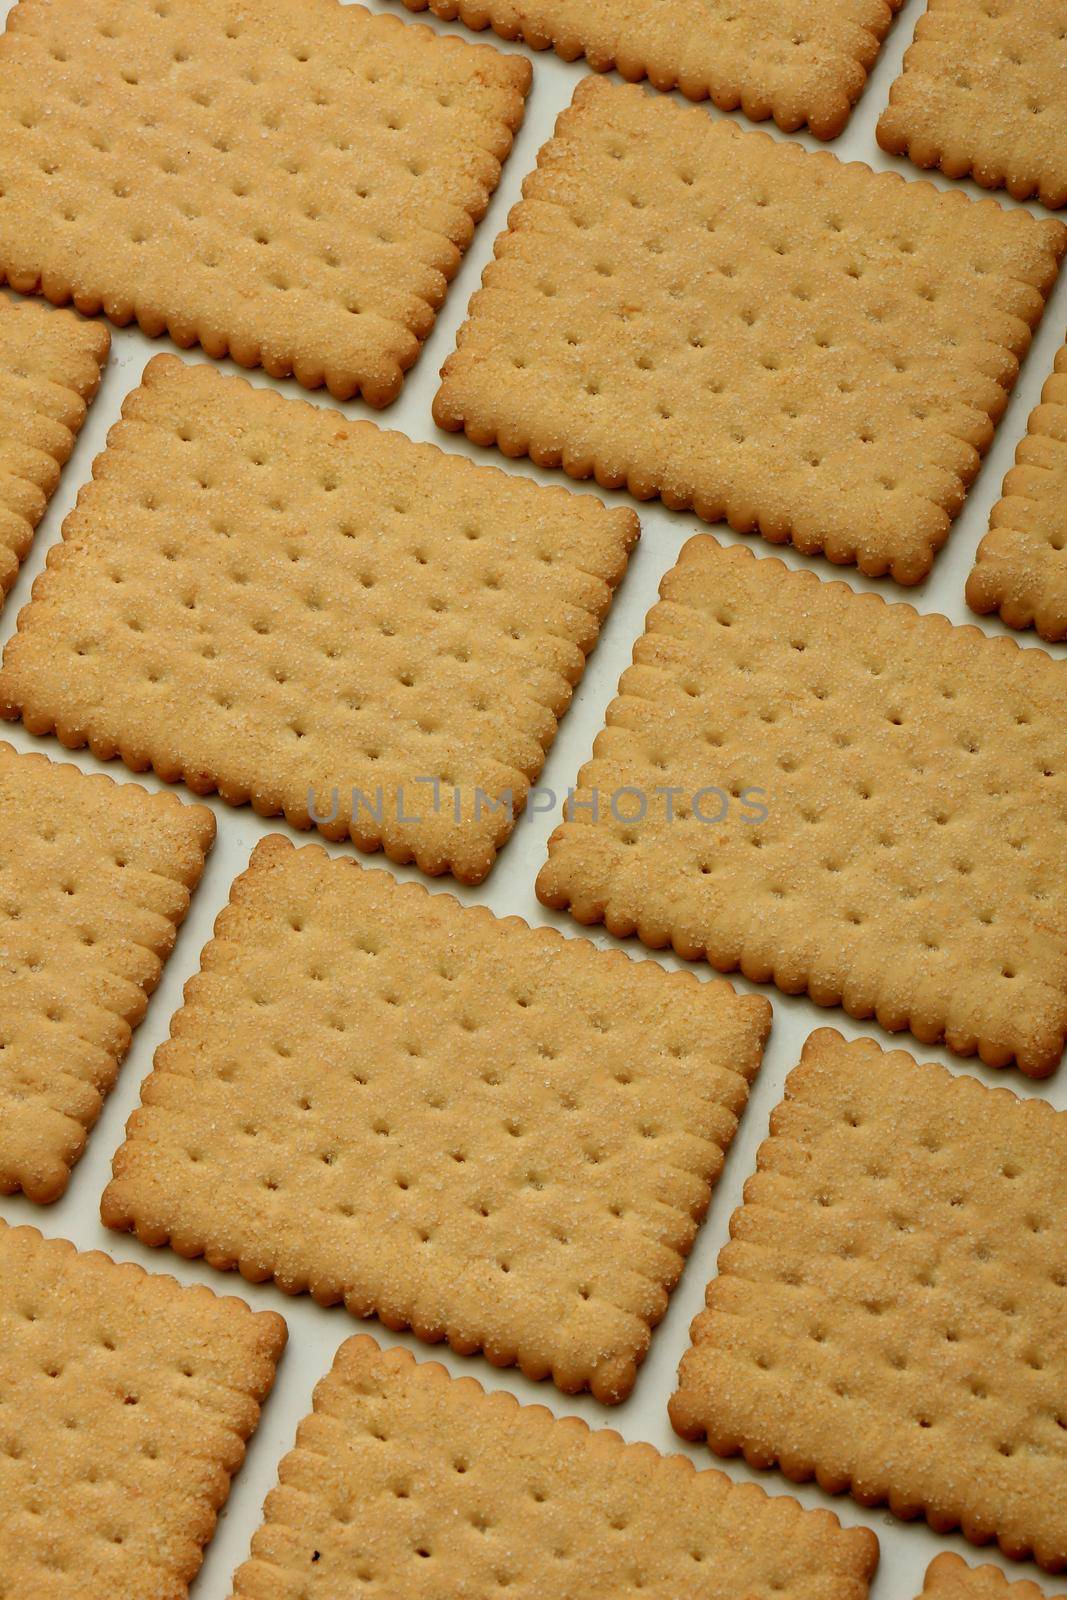 Plain biscuits in a brick pattern, cookie wall by studioportosabbia